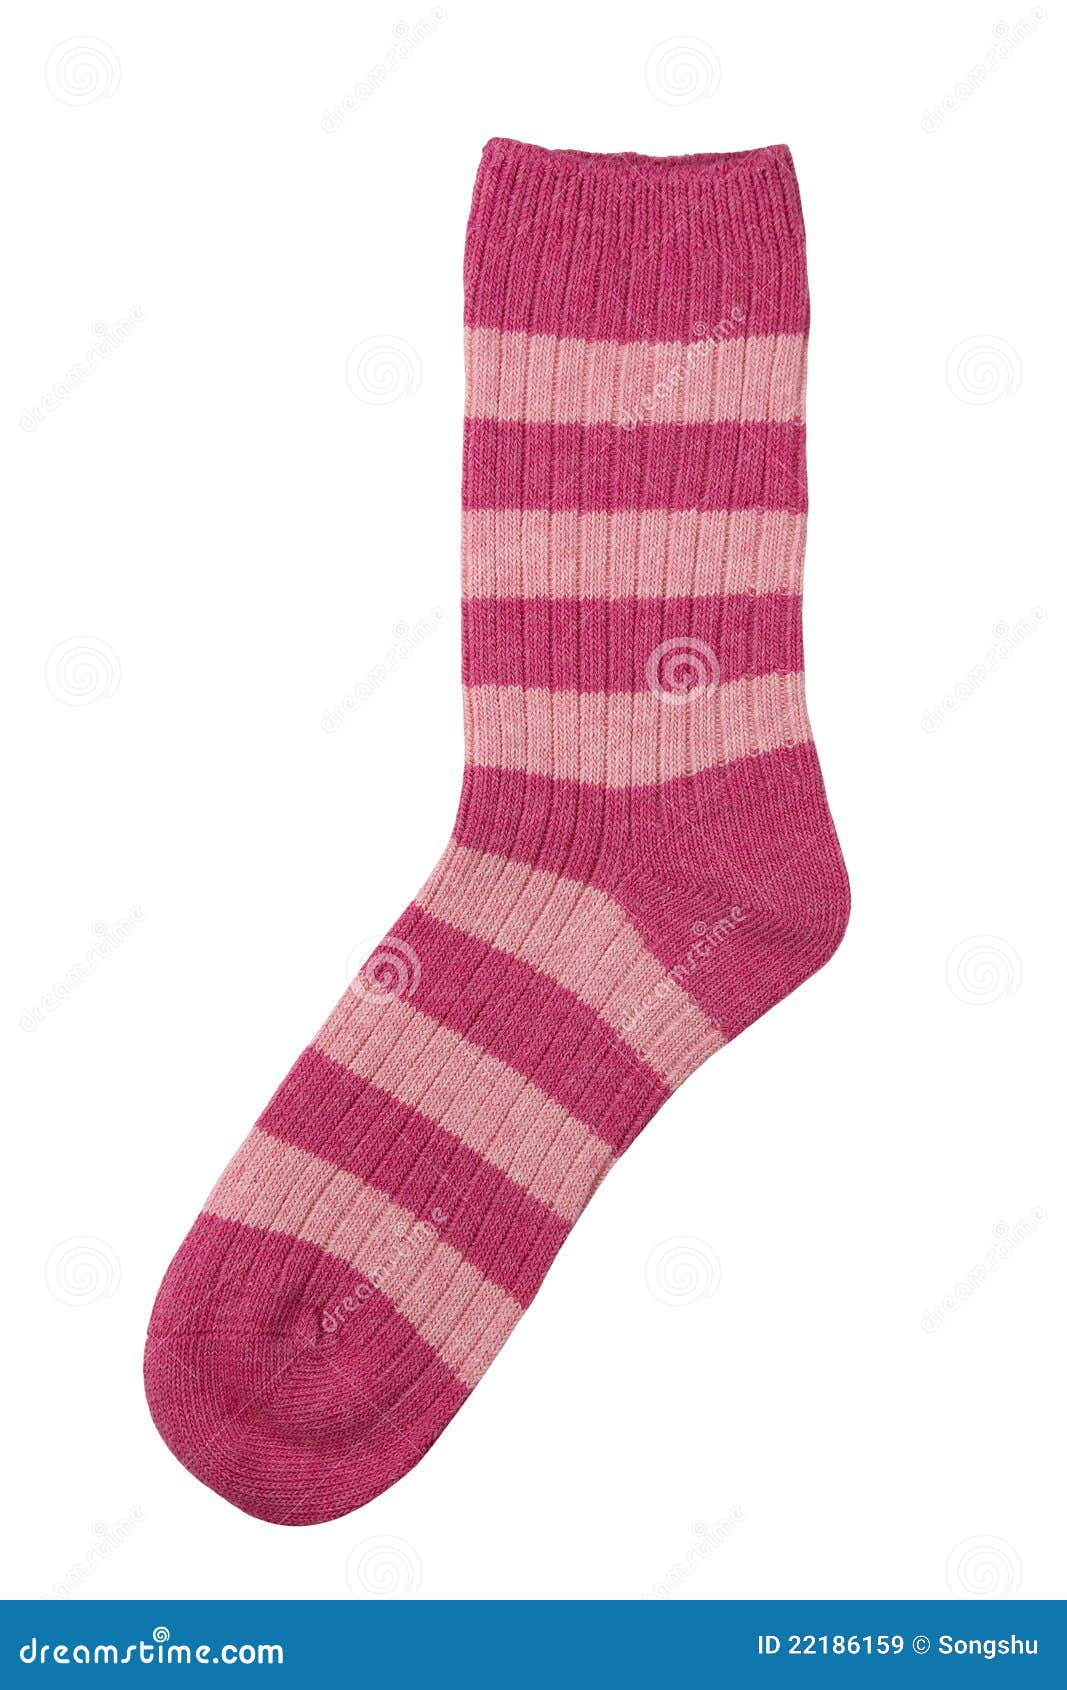 Pink Sock Isolated on White Stock Image - Image of garment, heat: 22186159